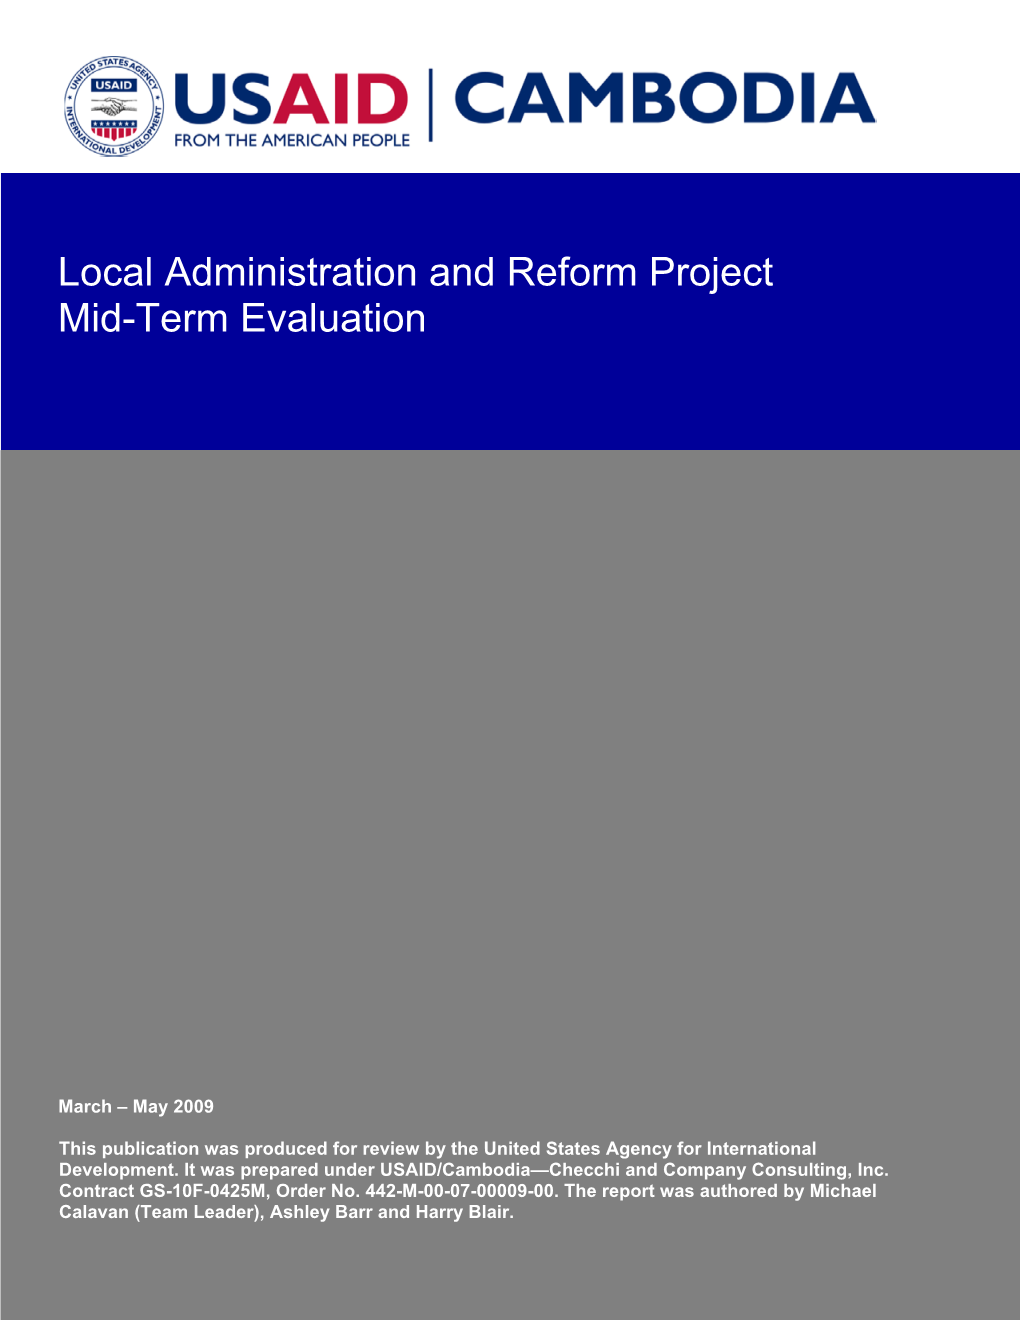 Local Administration and Reform Project Mid-Term Evaluation